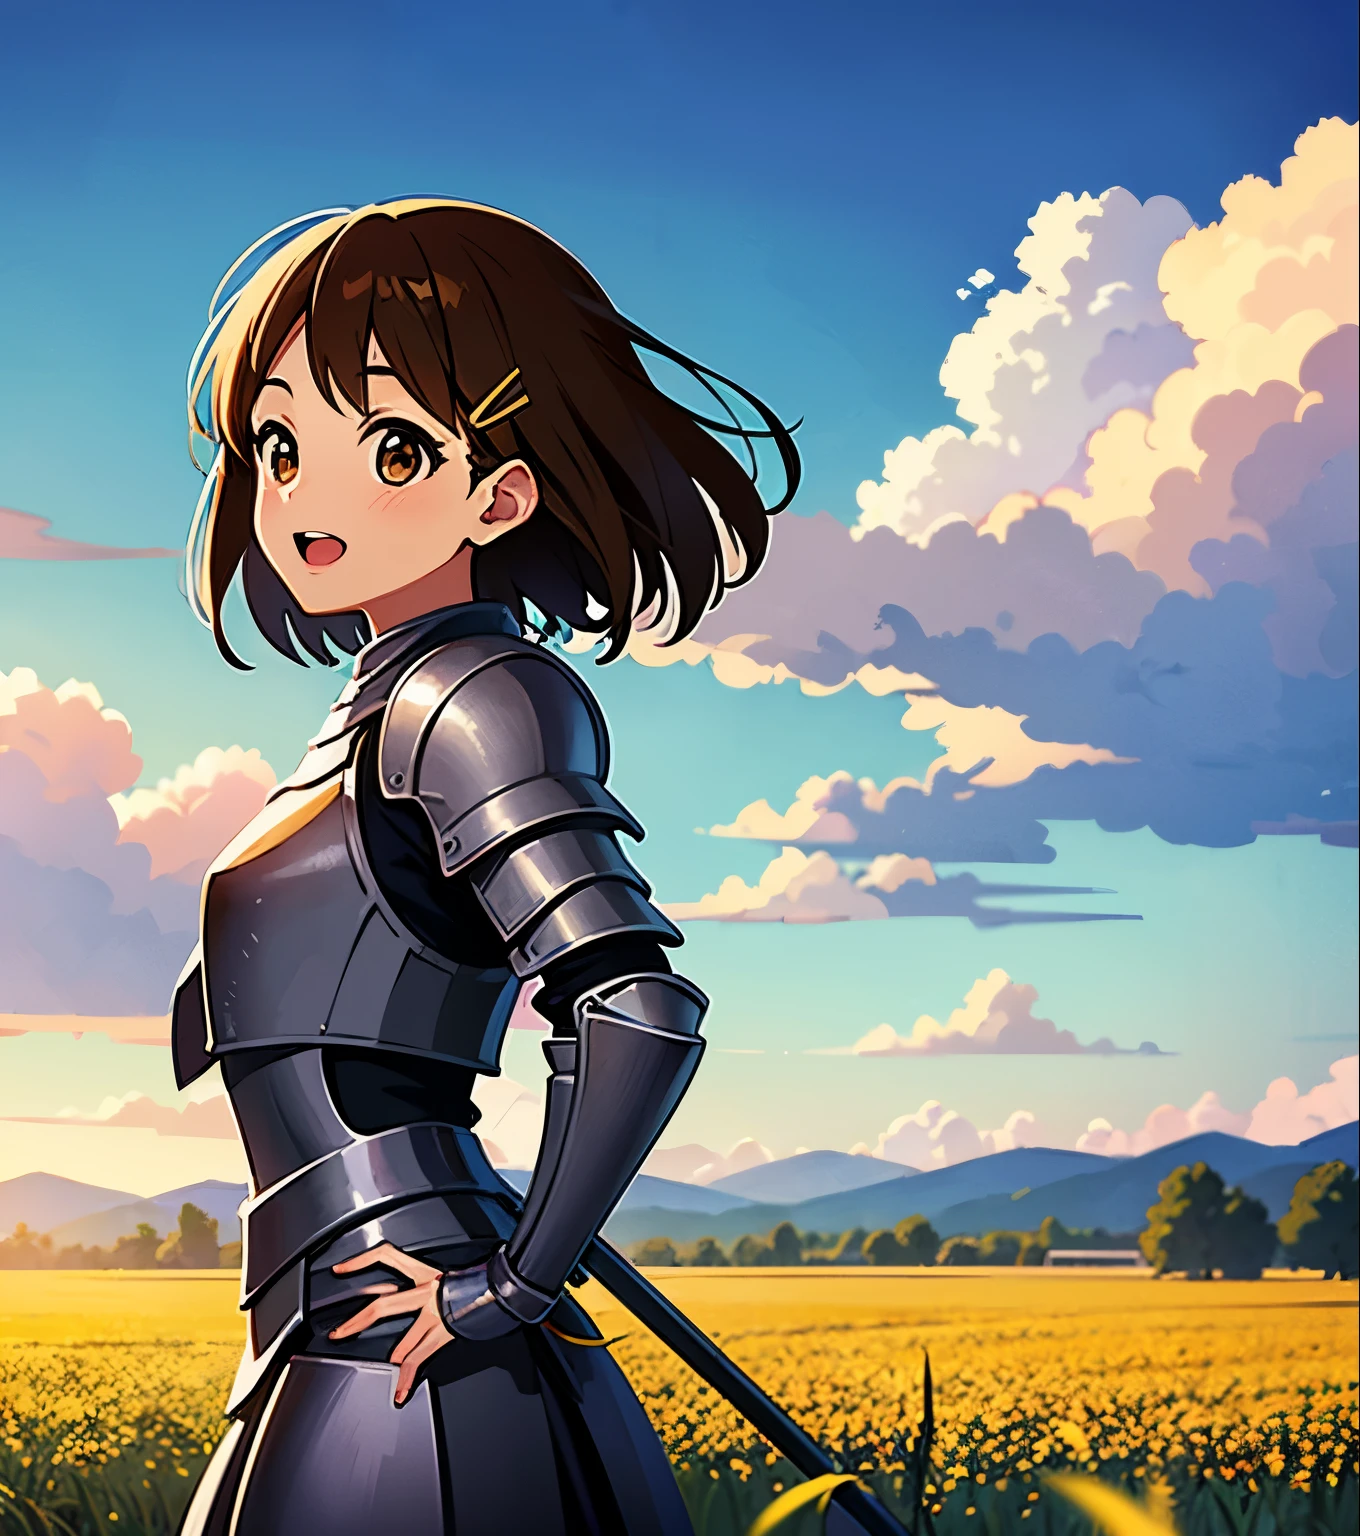 ((masterpiece)),(high details), (best quality),((perfect face)),((perfect fingers)),(high resolution), (1 girl in a field with a blue sky and clouds),Hirasawa Yui,K-ON anime,((short hair)),(brown hair),((brown eyes)),hair clip,(((wear knight armor))),open mouth and smile,hand on hip, morning day,scenery grass field with a blue sky,countryside landscape, beautiful anime scenery,anime nature, beautiful peace scene,cowboyshot, from side,